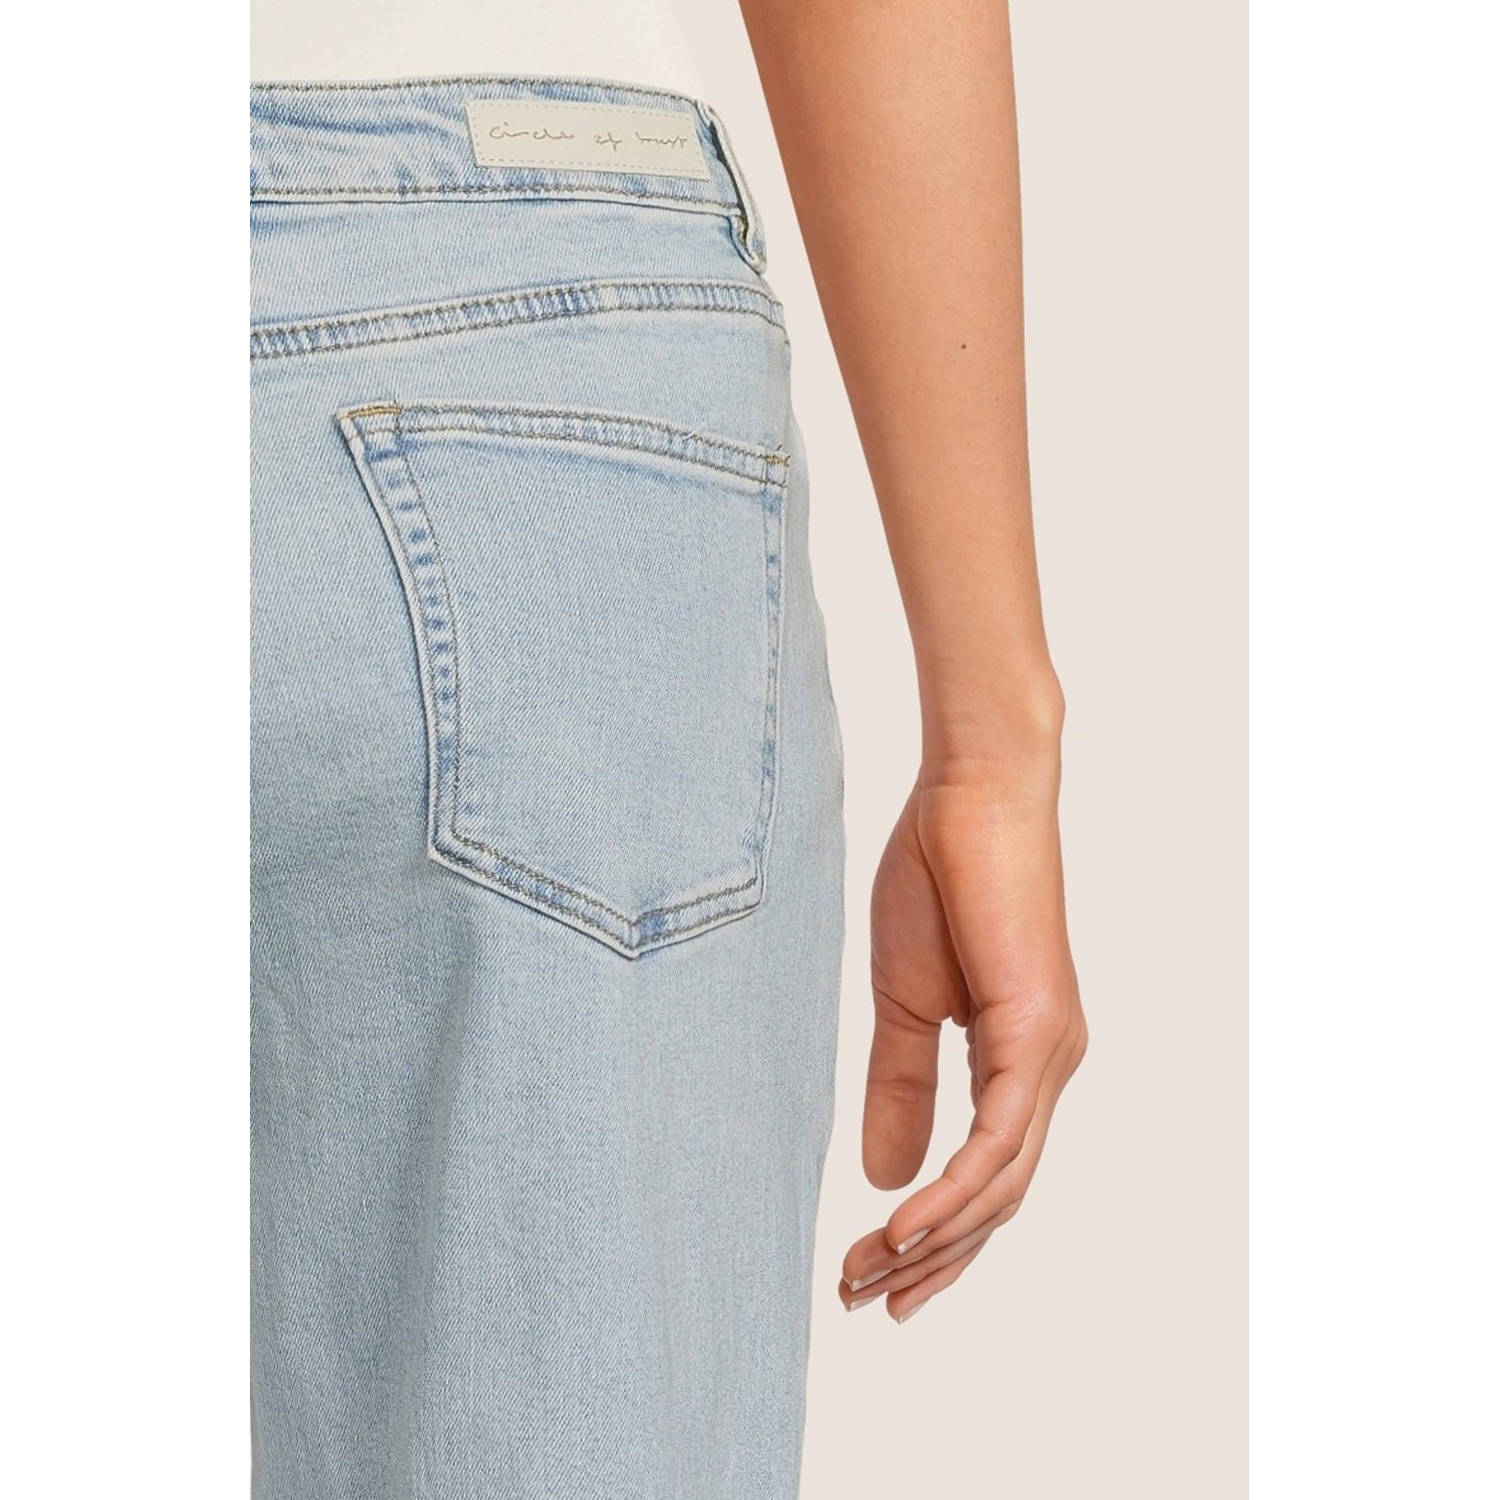 Circle of Trust high waist wide leg jeans MADDY washed blue denim